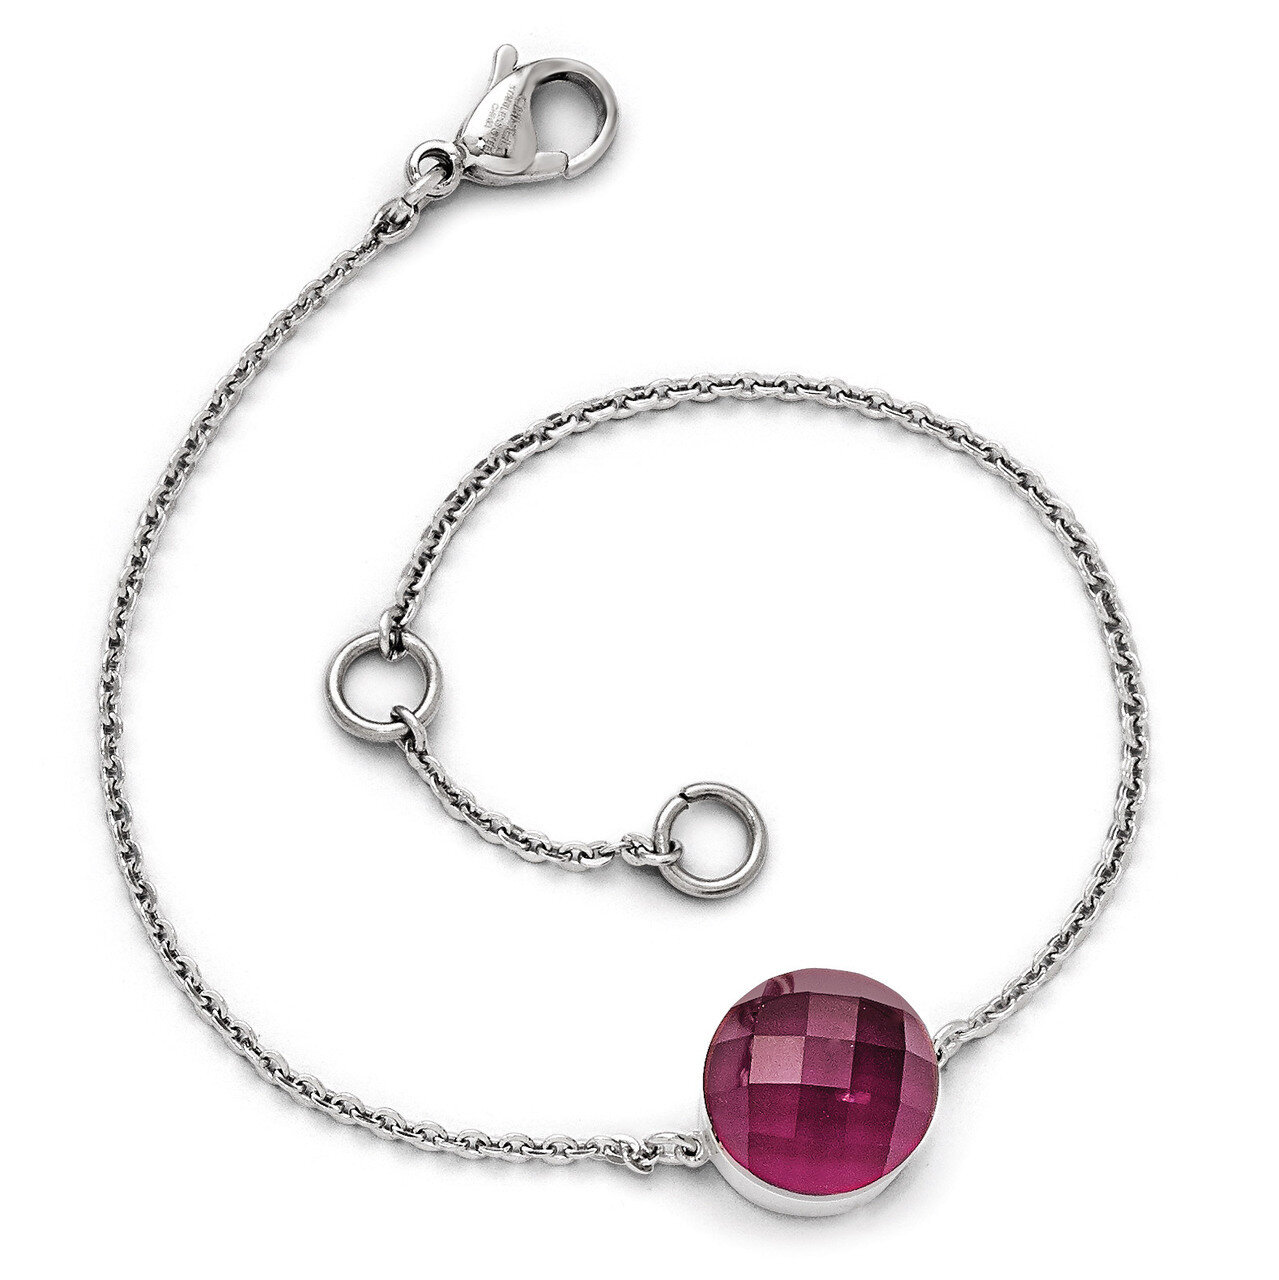 Polished Maroon Glass with 1 Inch Extension Bracelet - Stainless Steel SRB1602-7